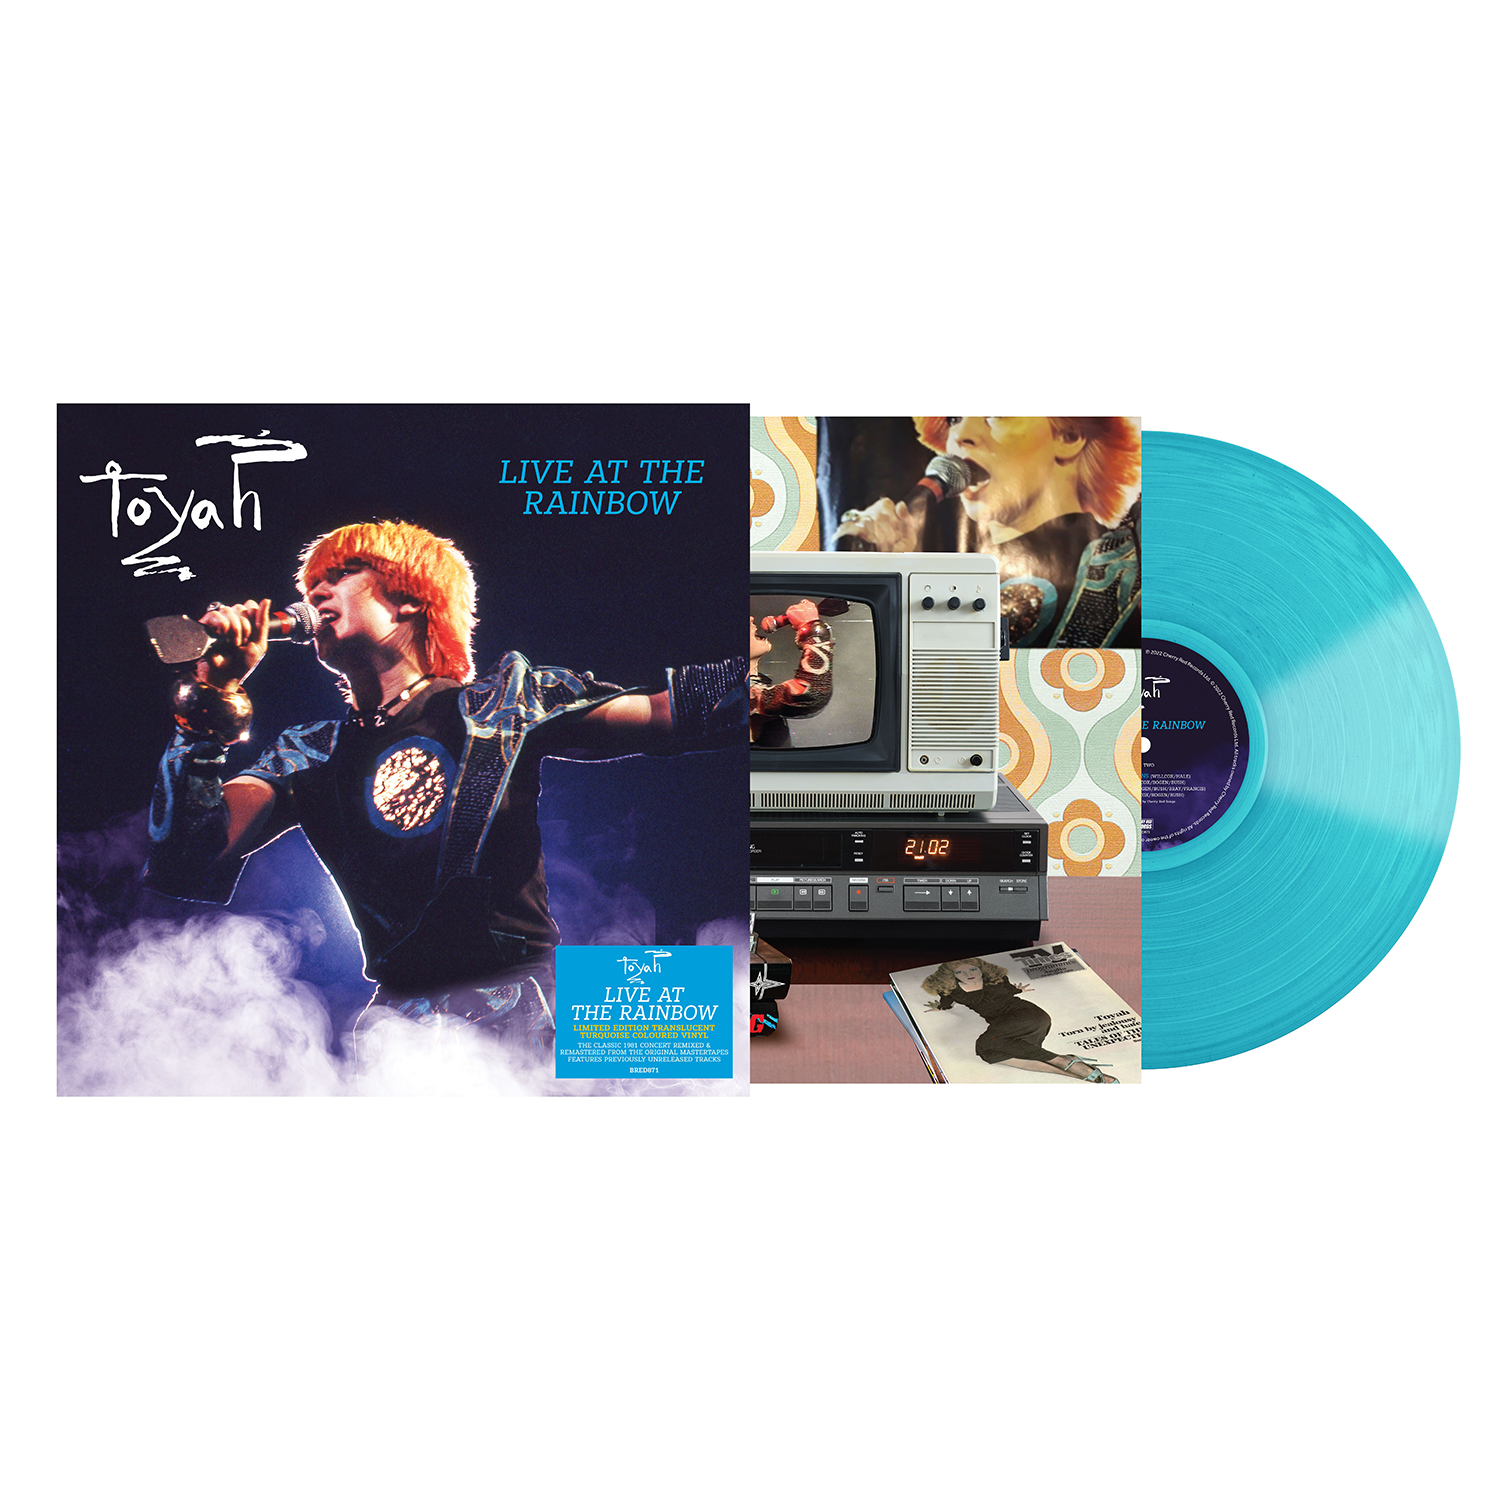 Toyah - Live At The Rainbow: Limited Edition Translucent Turquoise Vinyl 2LP